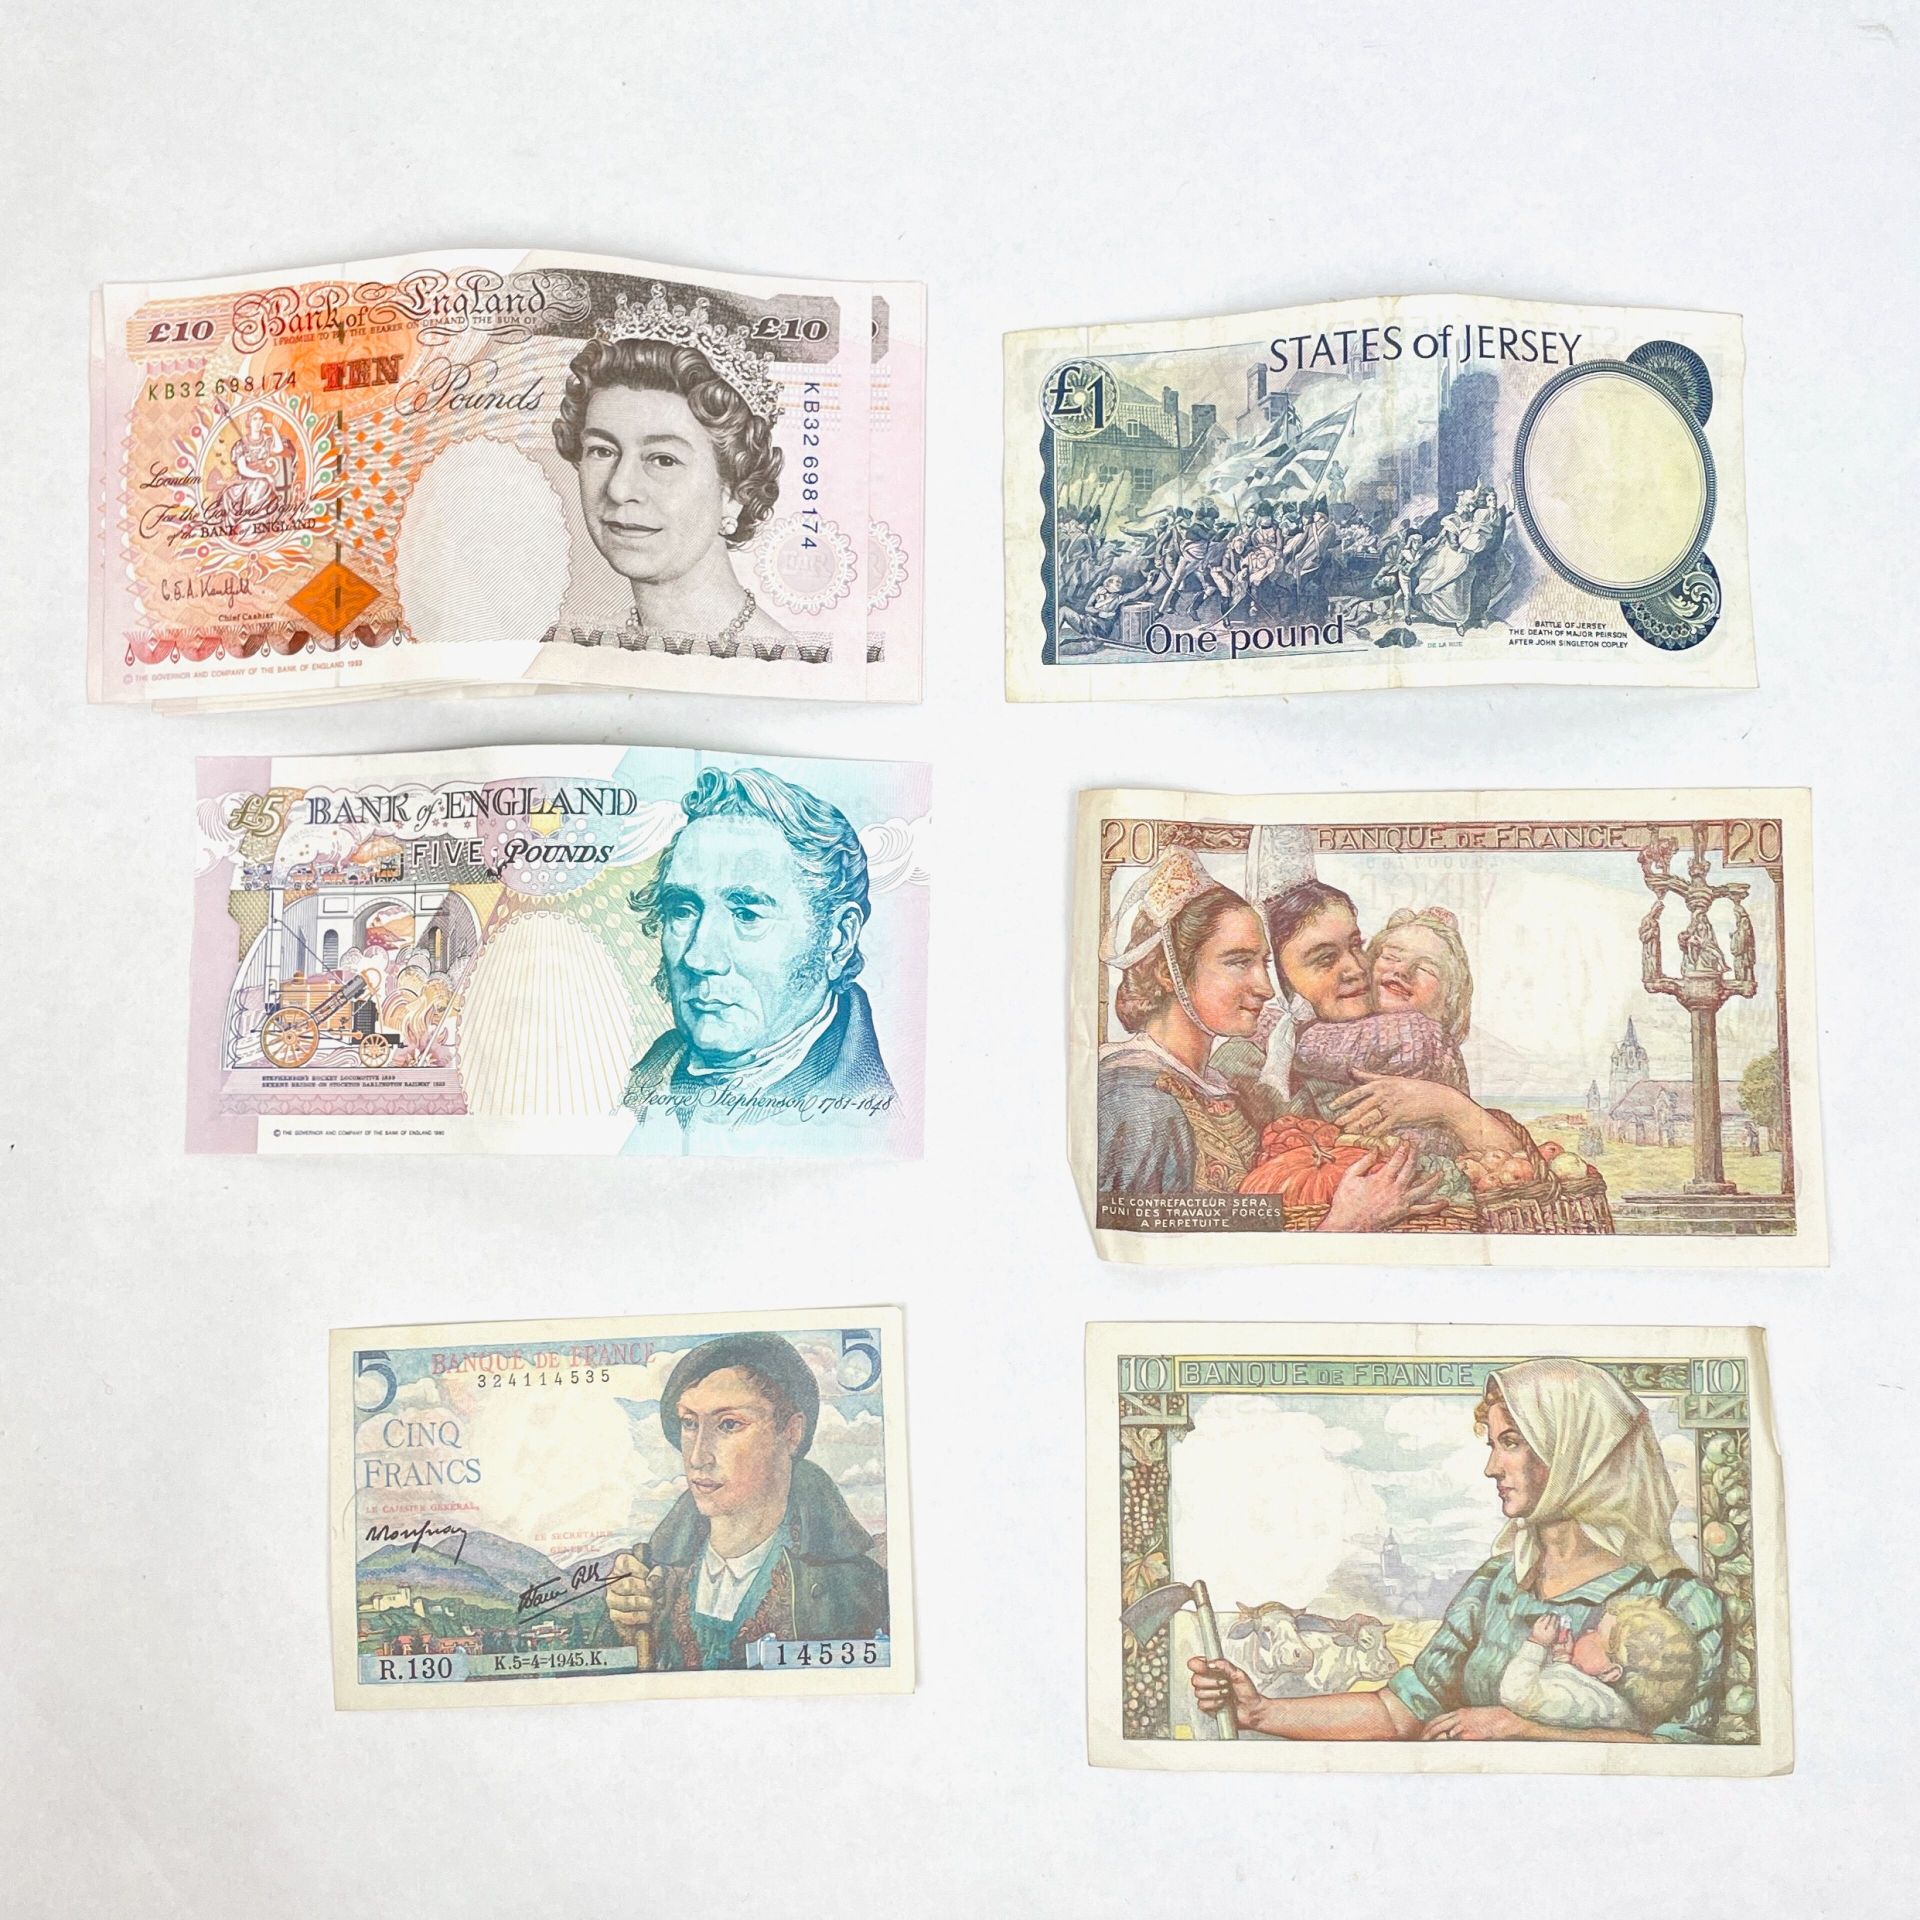 Null FRANCE - ENGLAND - JERSEY - MIDDLE 20th CENTURY 
Lot of banknotes :
- 1 ban&hellip;